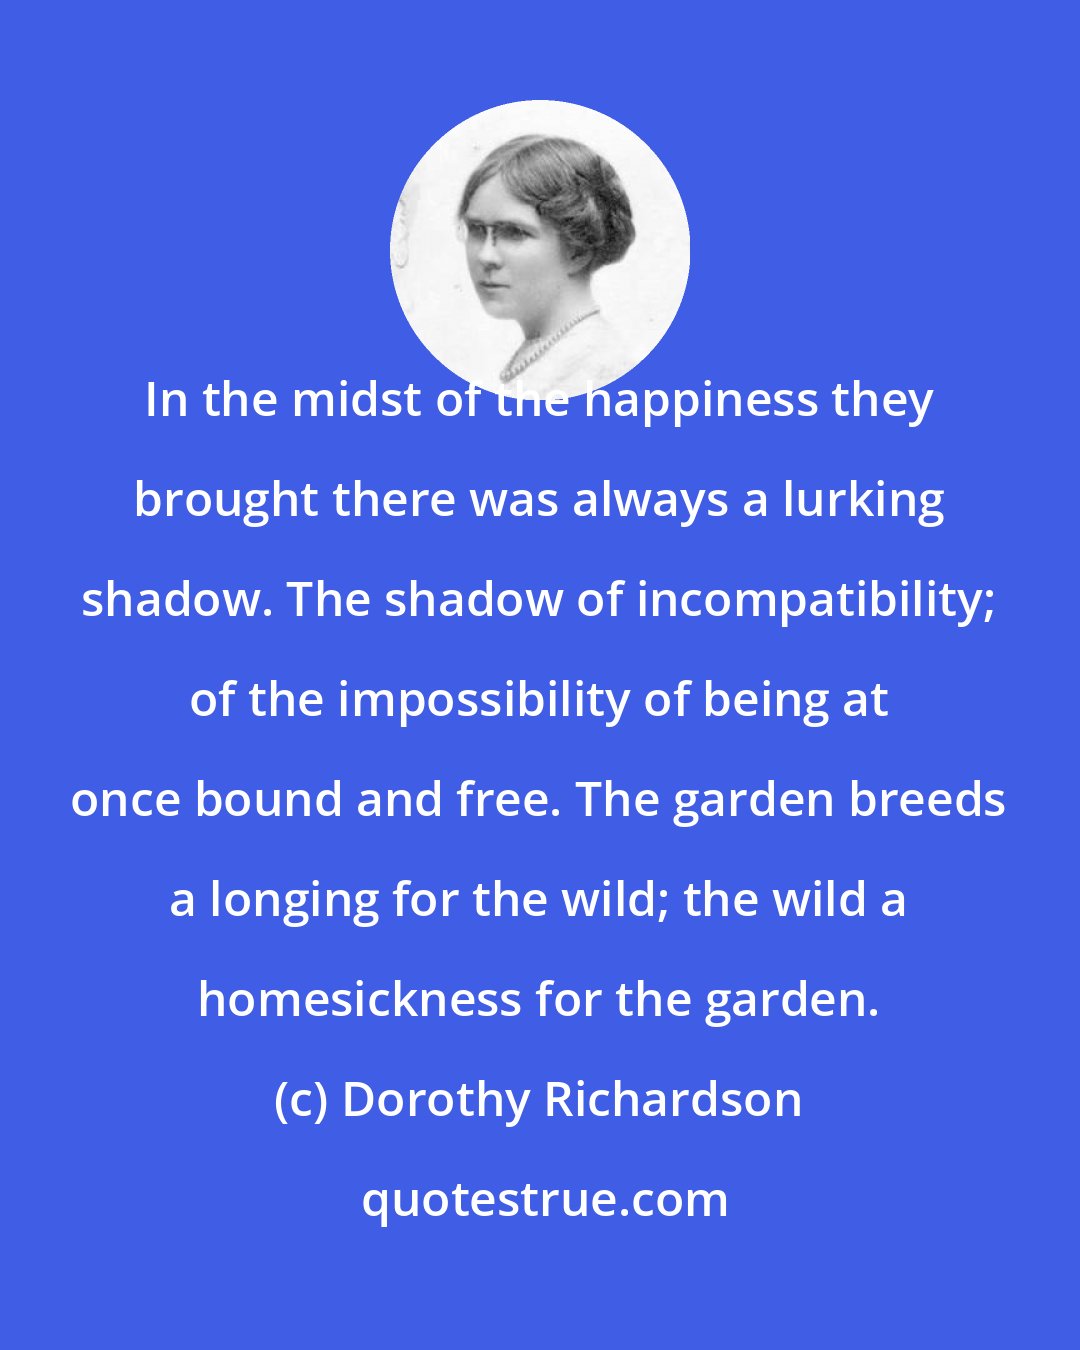 Dorothy Richardson: In the midst of the happiness they brought there was always a lurking shadow. The shadow of incompatibility; of the impossibility of being at once bound and free. The garden breeds a longing for the wild; the wild a homesickness for the garden.